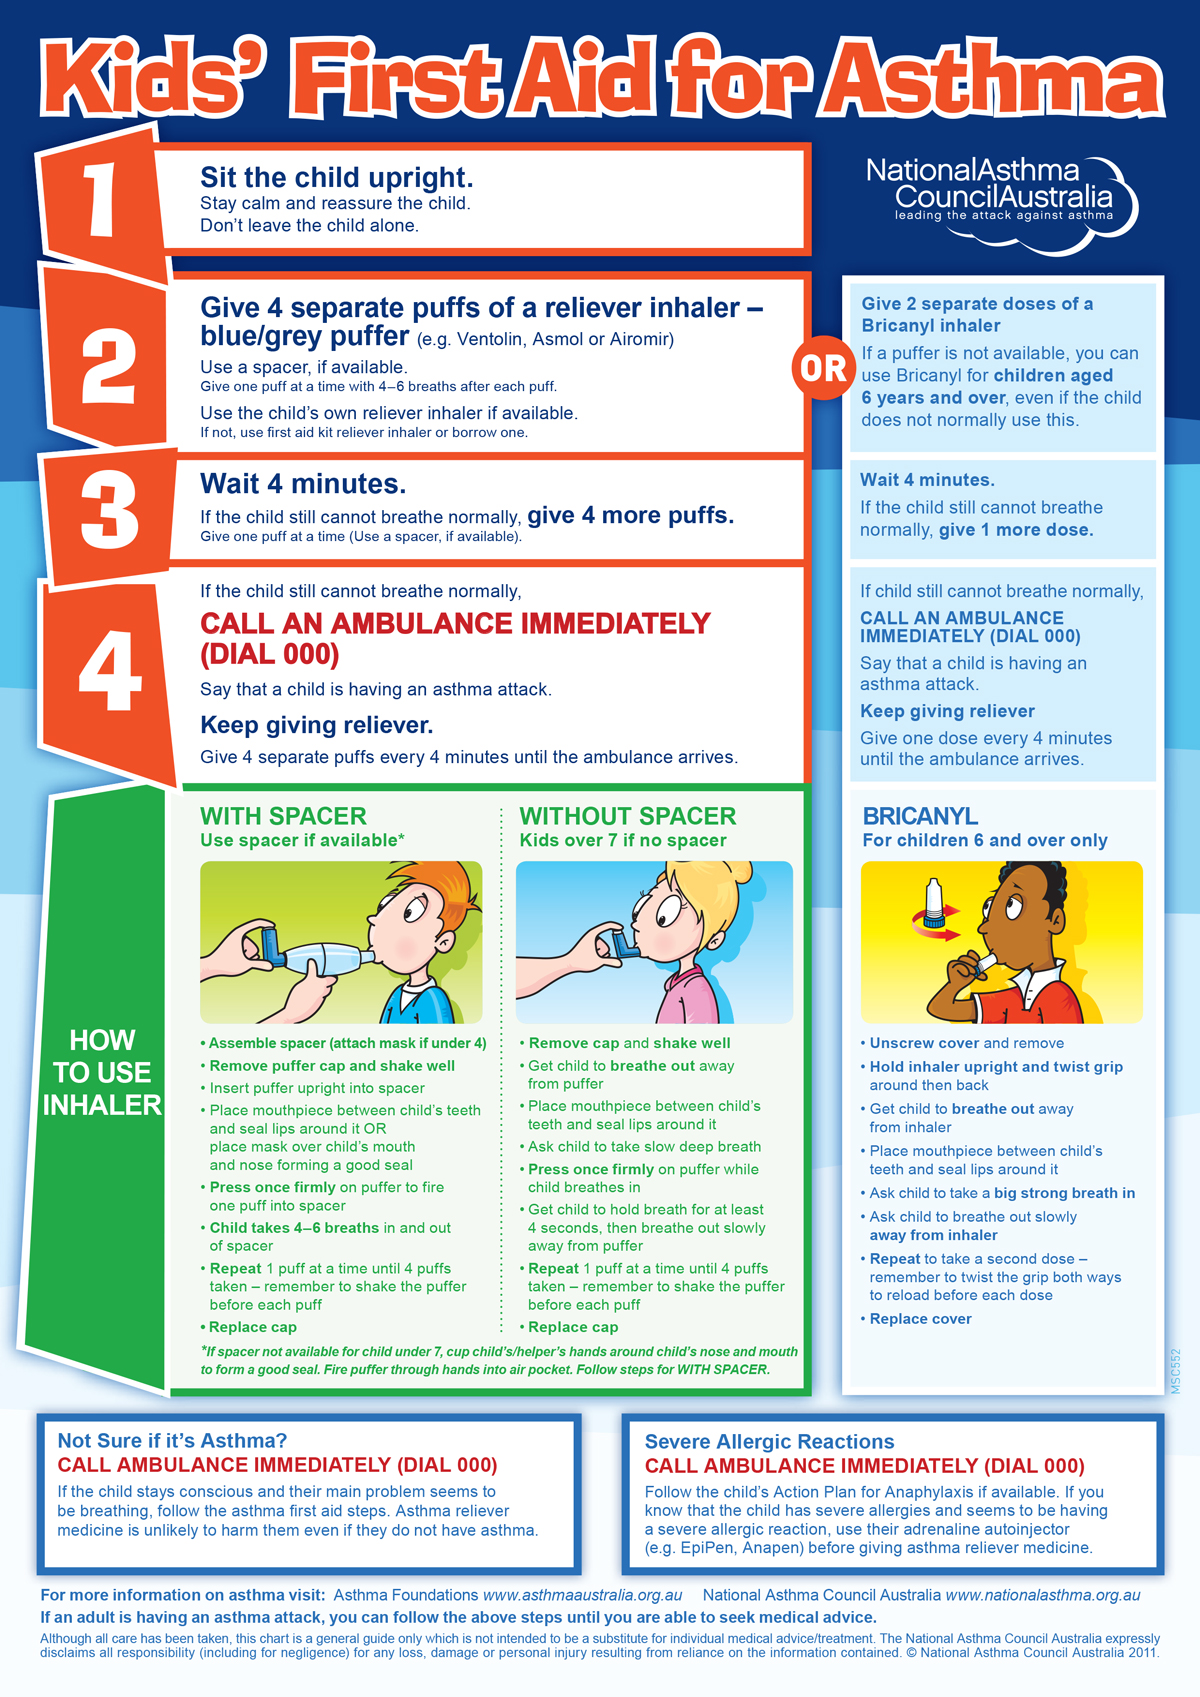 Printable chart of first aid procedures for asthma